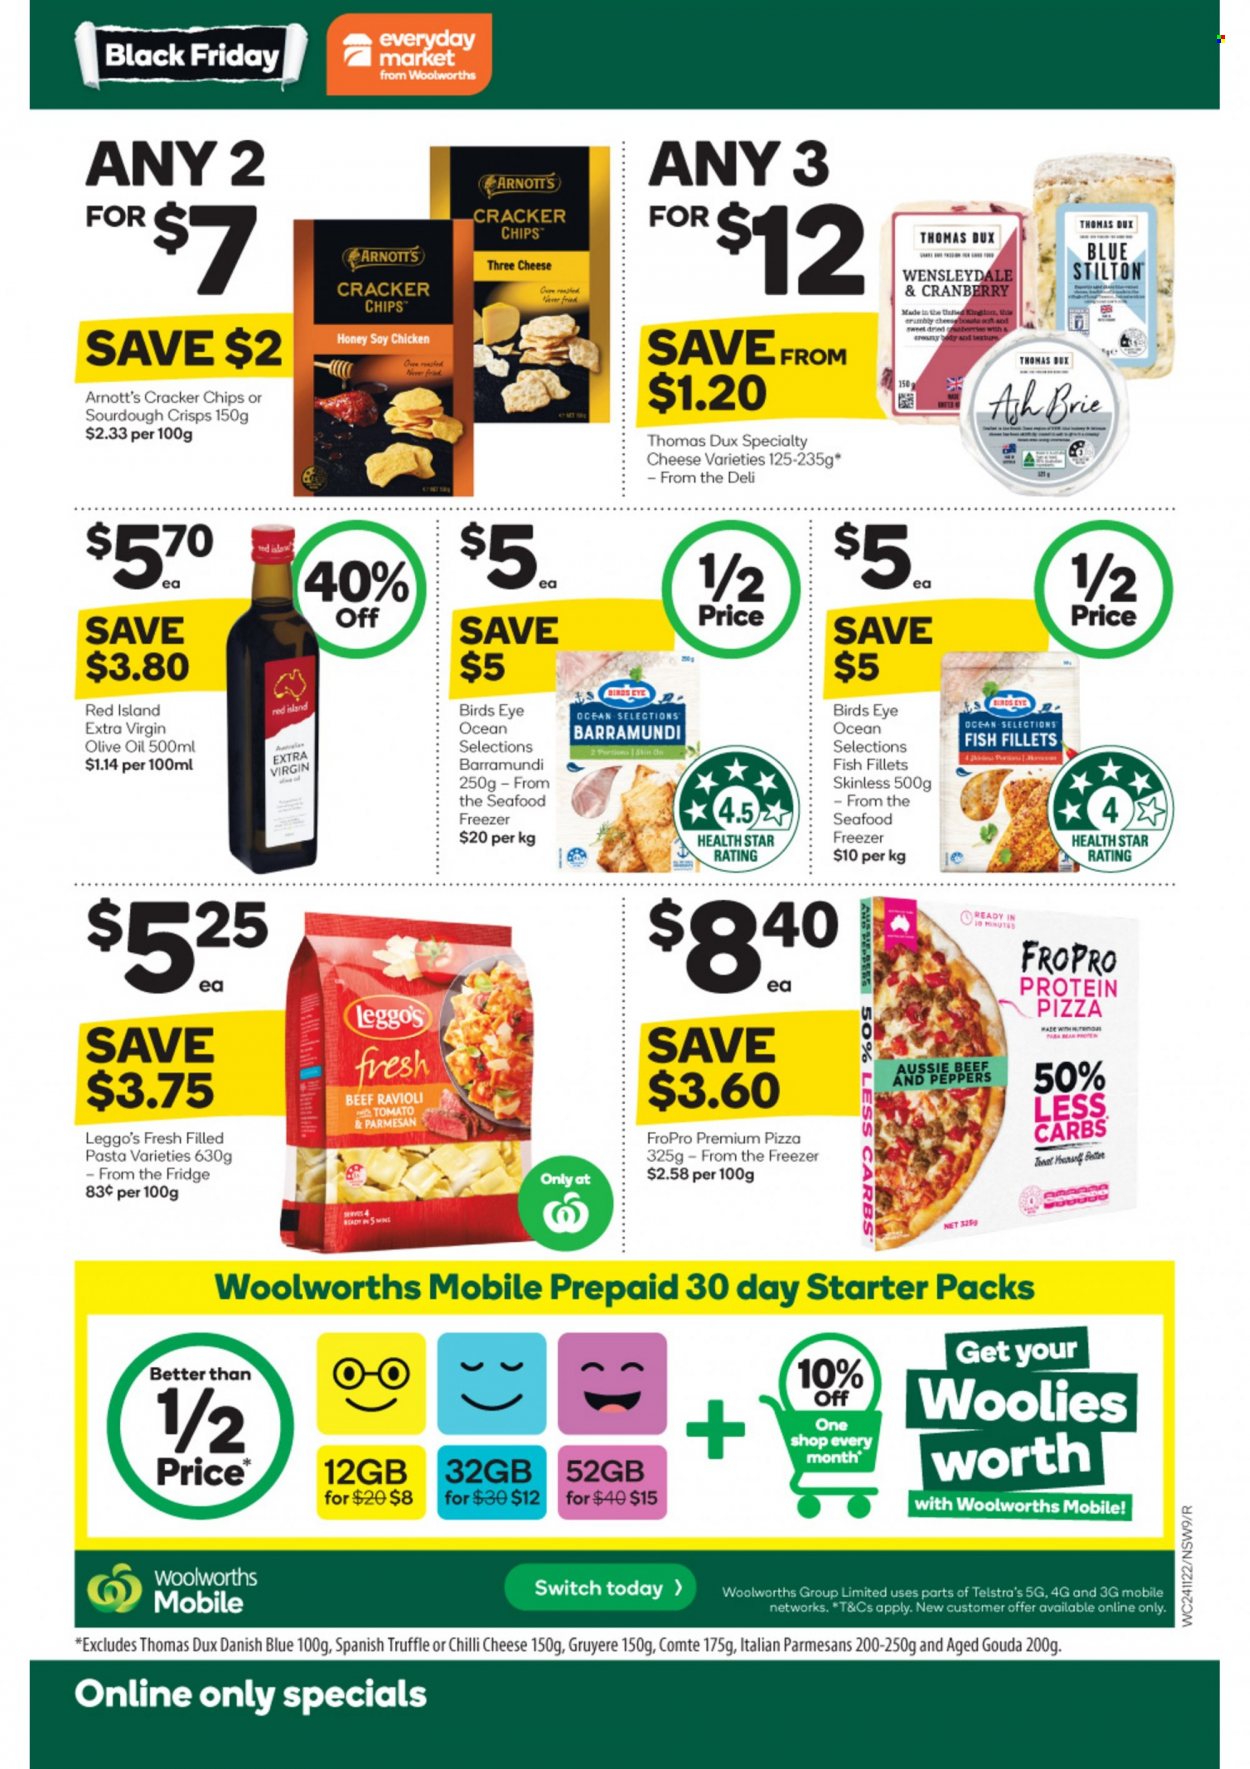 thumbnail - Woolworths Catalogue - 23 Nov 2022 - 29 Nov 2022 - Sales products - barramundi, fish fillets, seafood, fish, ravioli, pizza, pasta, Bird's Eye, filled pasta, gouda, Gruyere, Stilton, Wensleydale, parmesan, brie, truffles, crackers, chips, extra virgin olive oil, olive oil, oil, honey, switch, Aussie. Page 9.